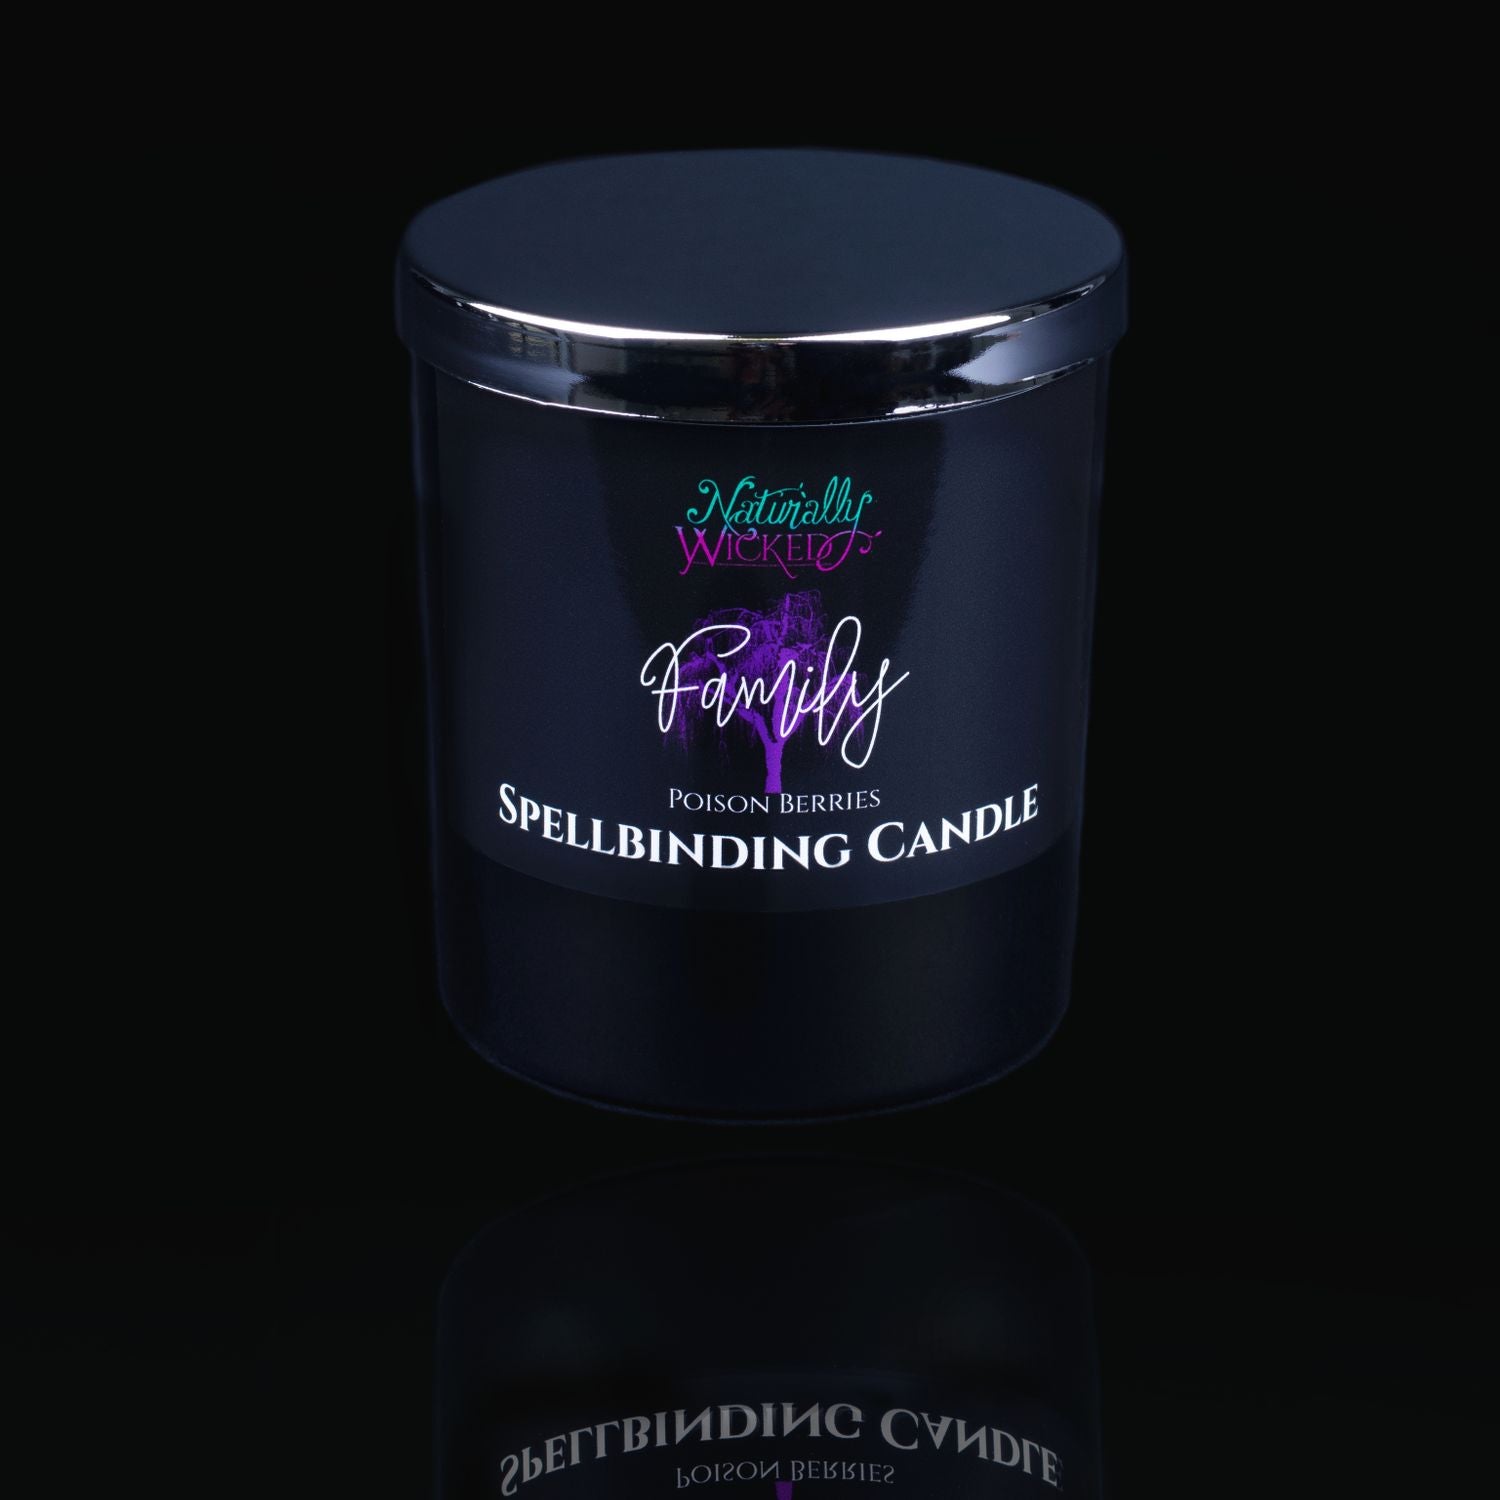 Naturally Wicked Spellbinding Family Spell Candle With Mirror Finished Exquisite Lid In Place. Featuring A Black Gloss Label And A Poison Berries Purple Family Tree. Treat Your Family To The Perfect Gift